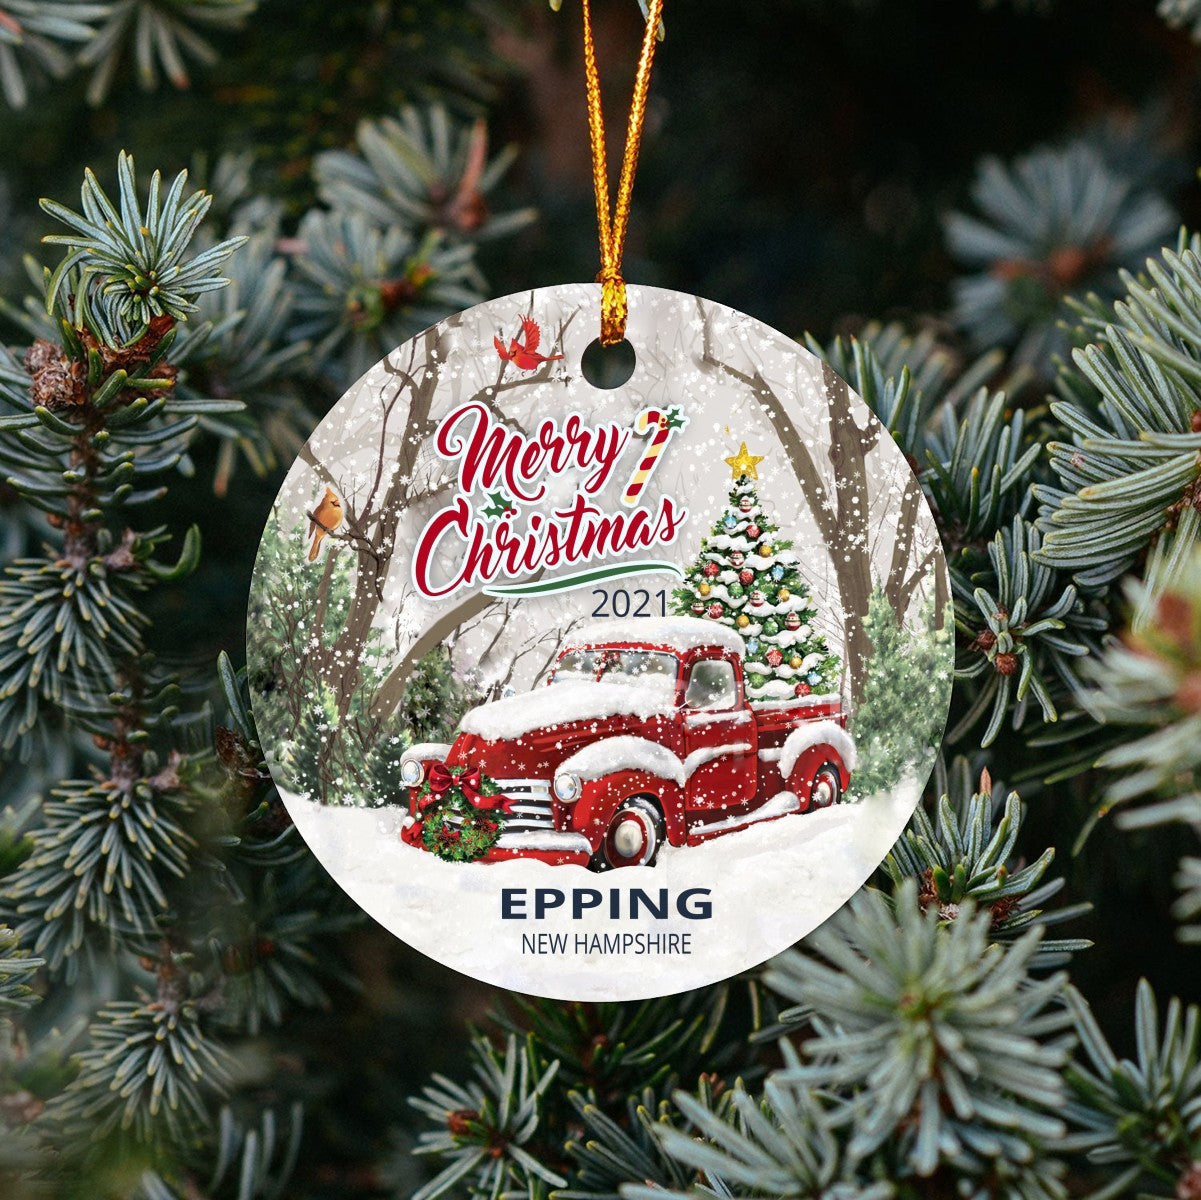 Christmas Tree Ornaments Epping - Ornament With Name City, State Epping New Hampshire NH Ornament - Red Truck Xmas Ornaments 3'' Plastic Gift For Family, Friend And Housewarming